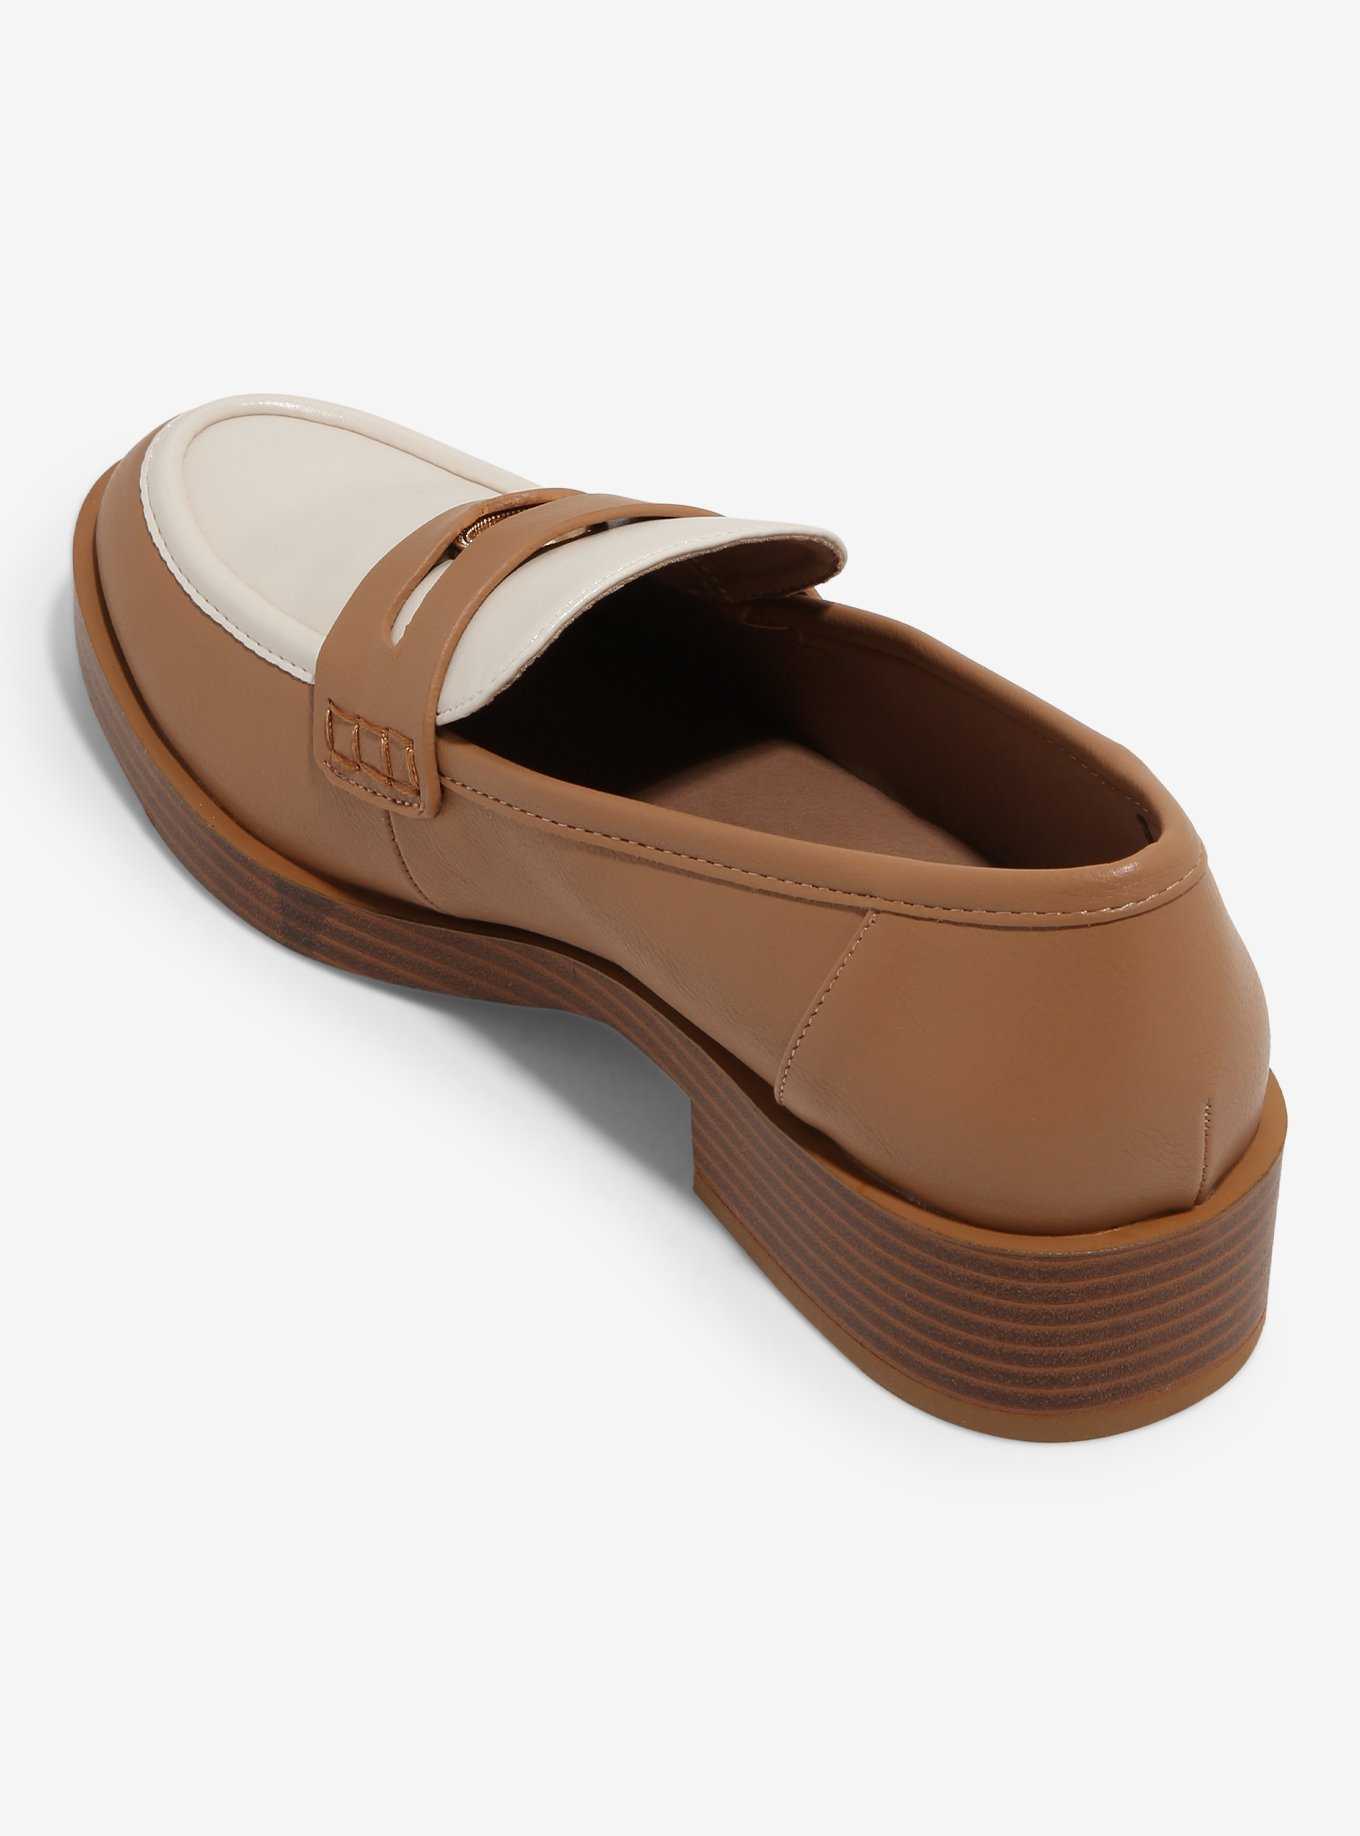 Chinese Laundry Tan & Cream Loafers, , hi-res